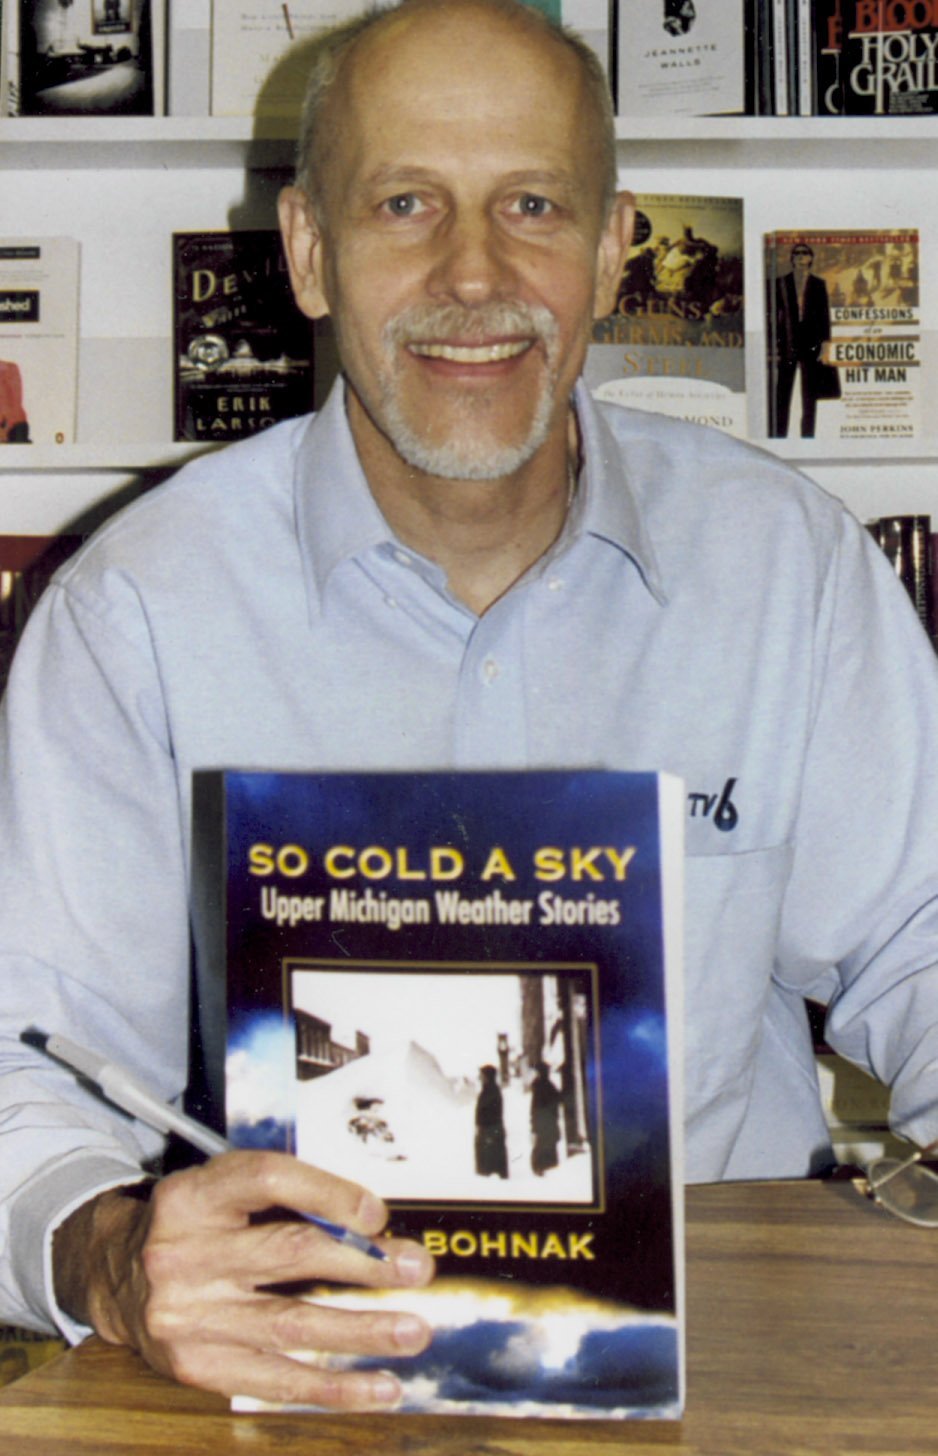 Karl Bohnak, Author, So Cold A Sky, Upper Michigan Weather Stories - Be Inspired UP